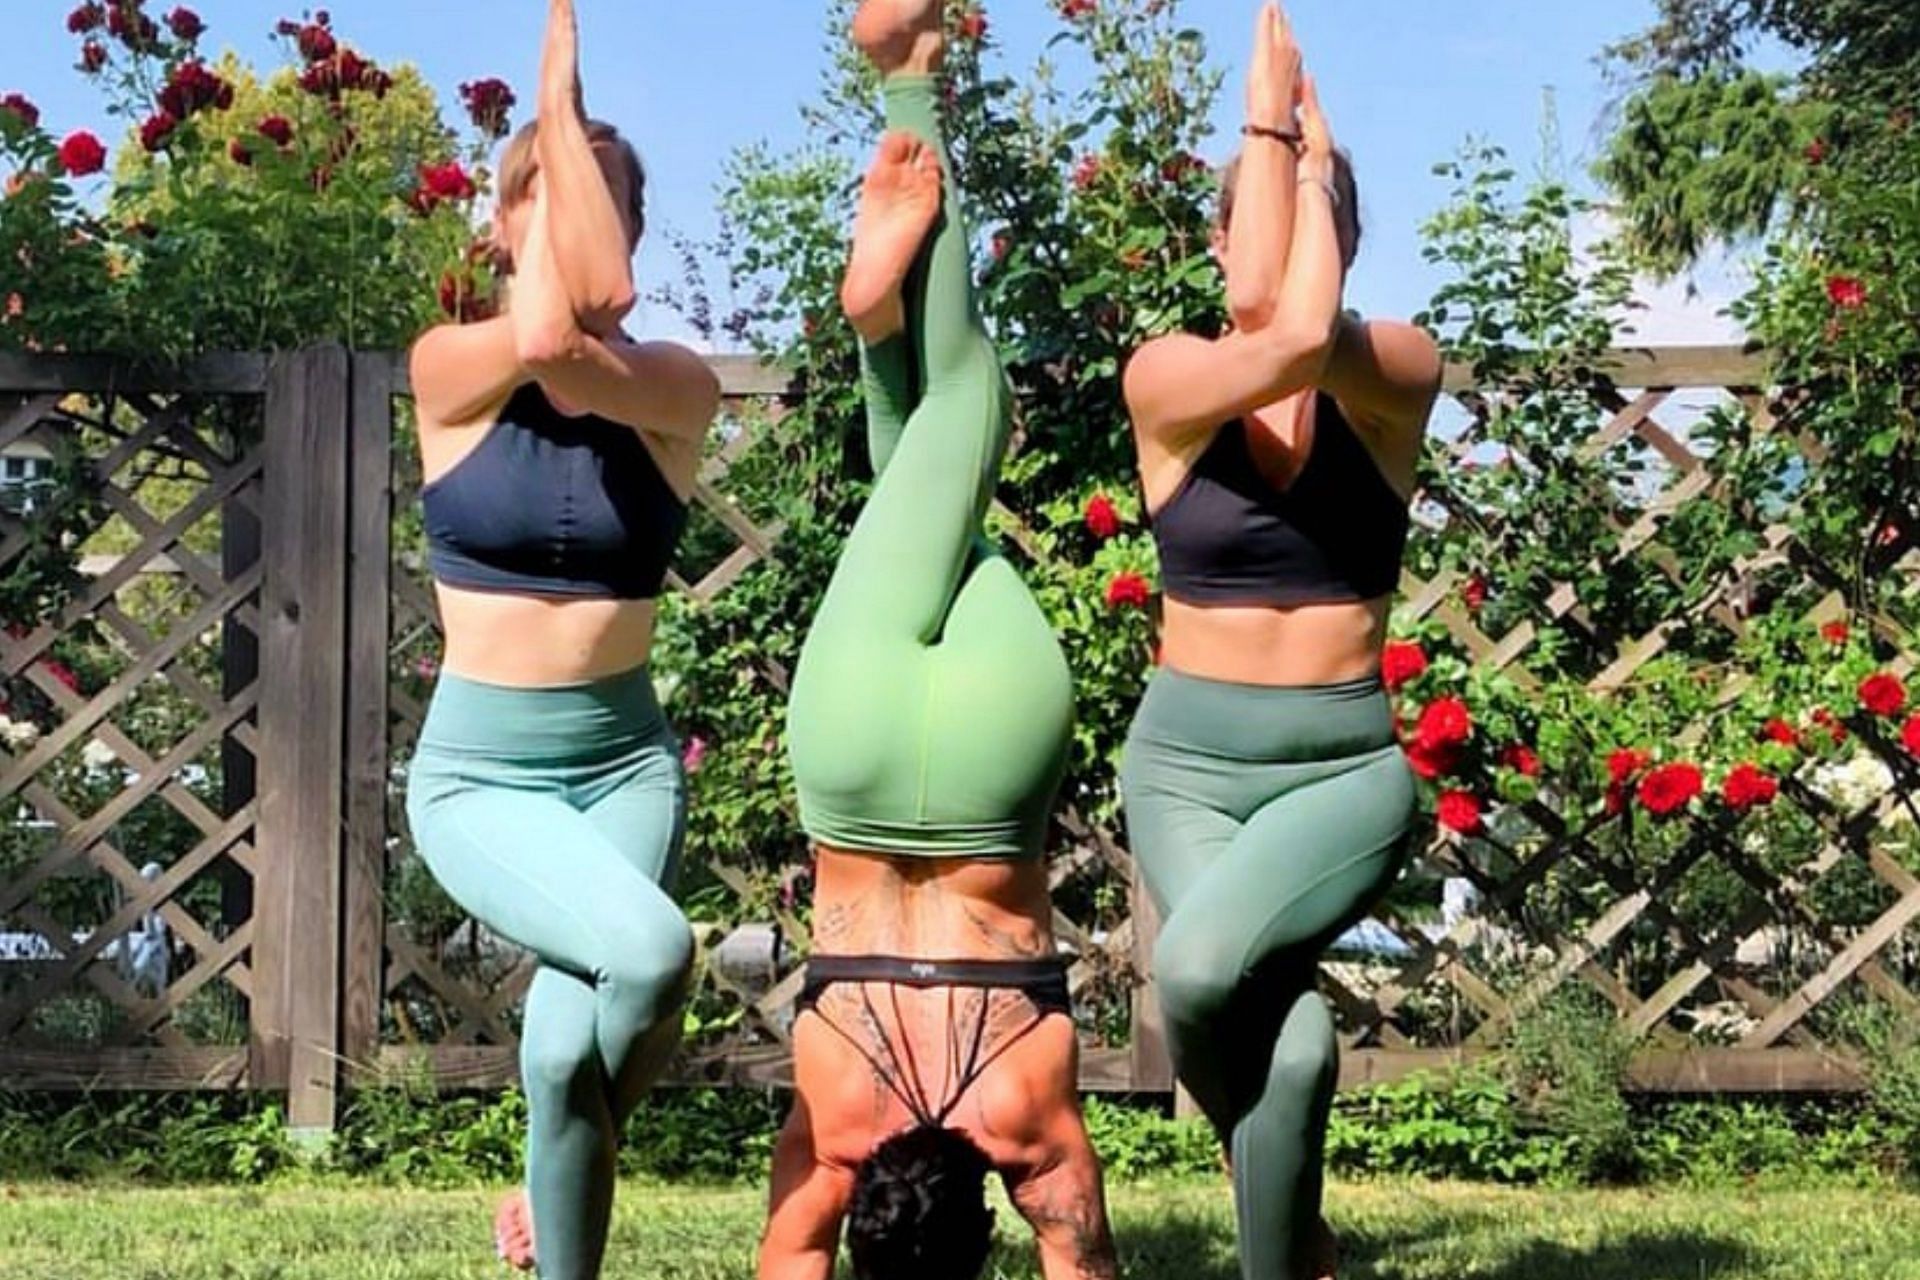 3-people yoga poses should be done in proper form. (Photo via Instagram/annaexploresyoga)